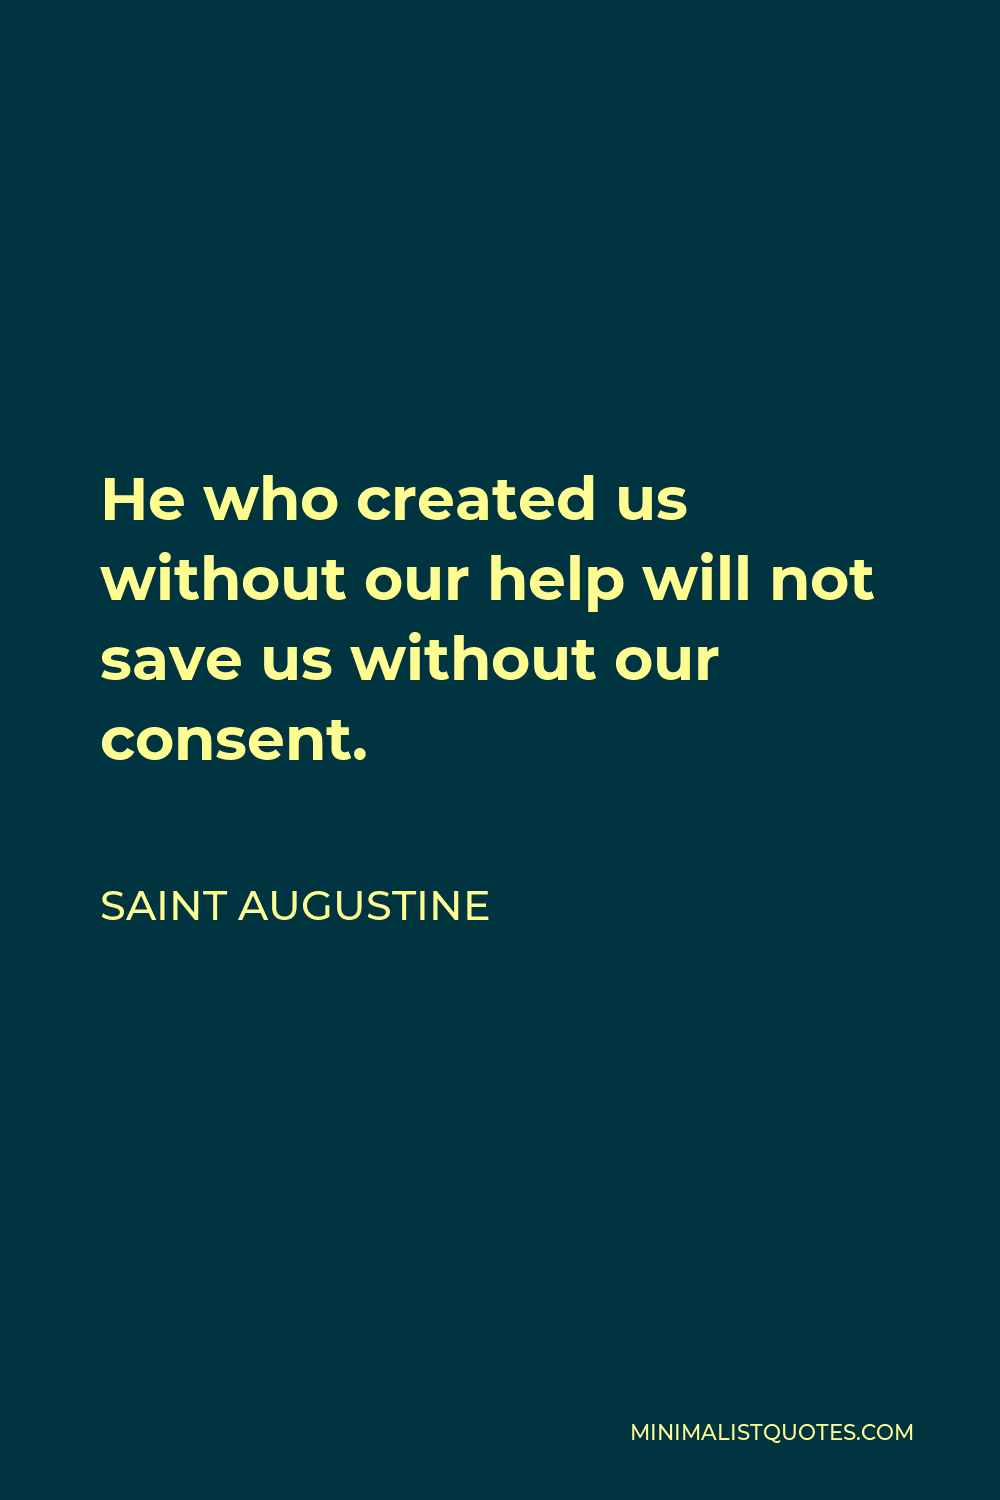 Saint Augustine Quote - He who created us without our help will not save us without our consent.